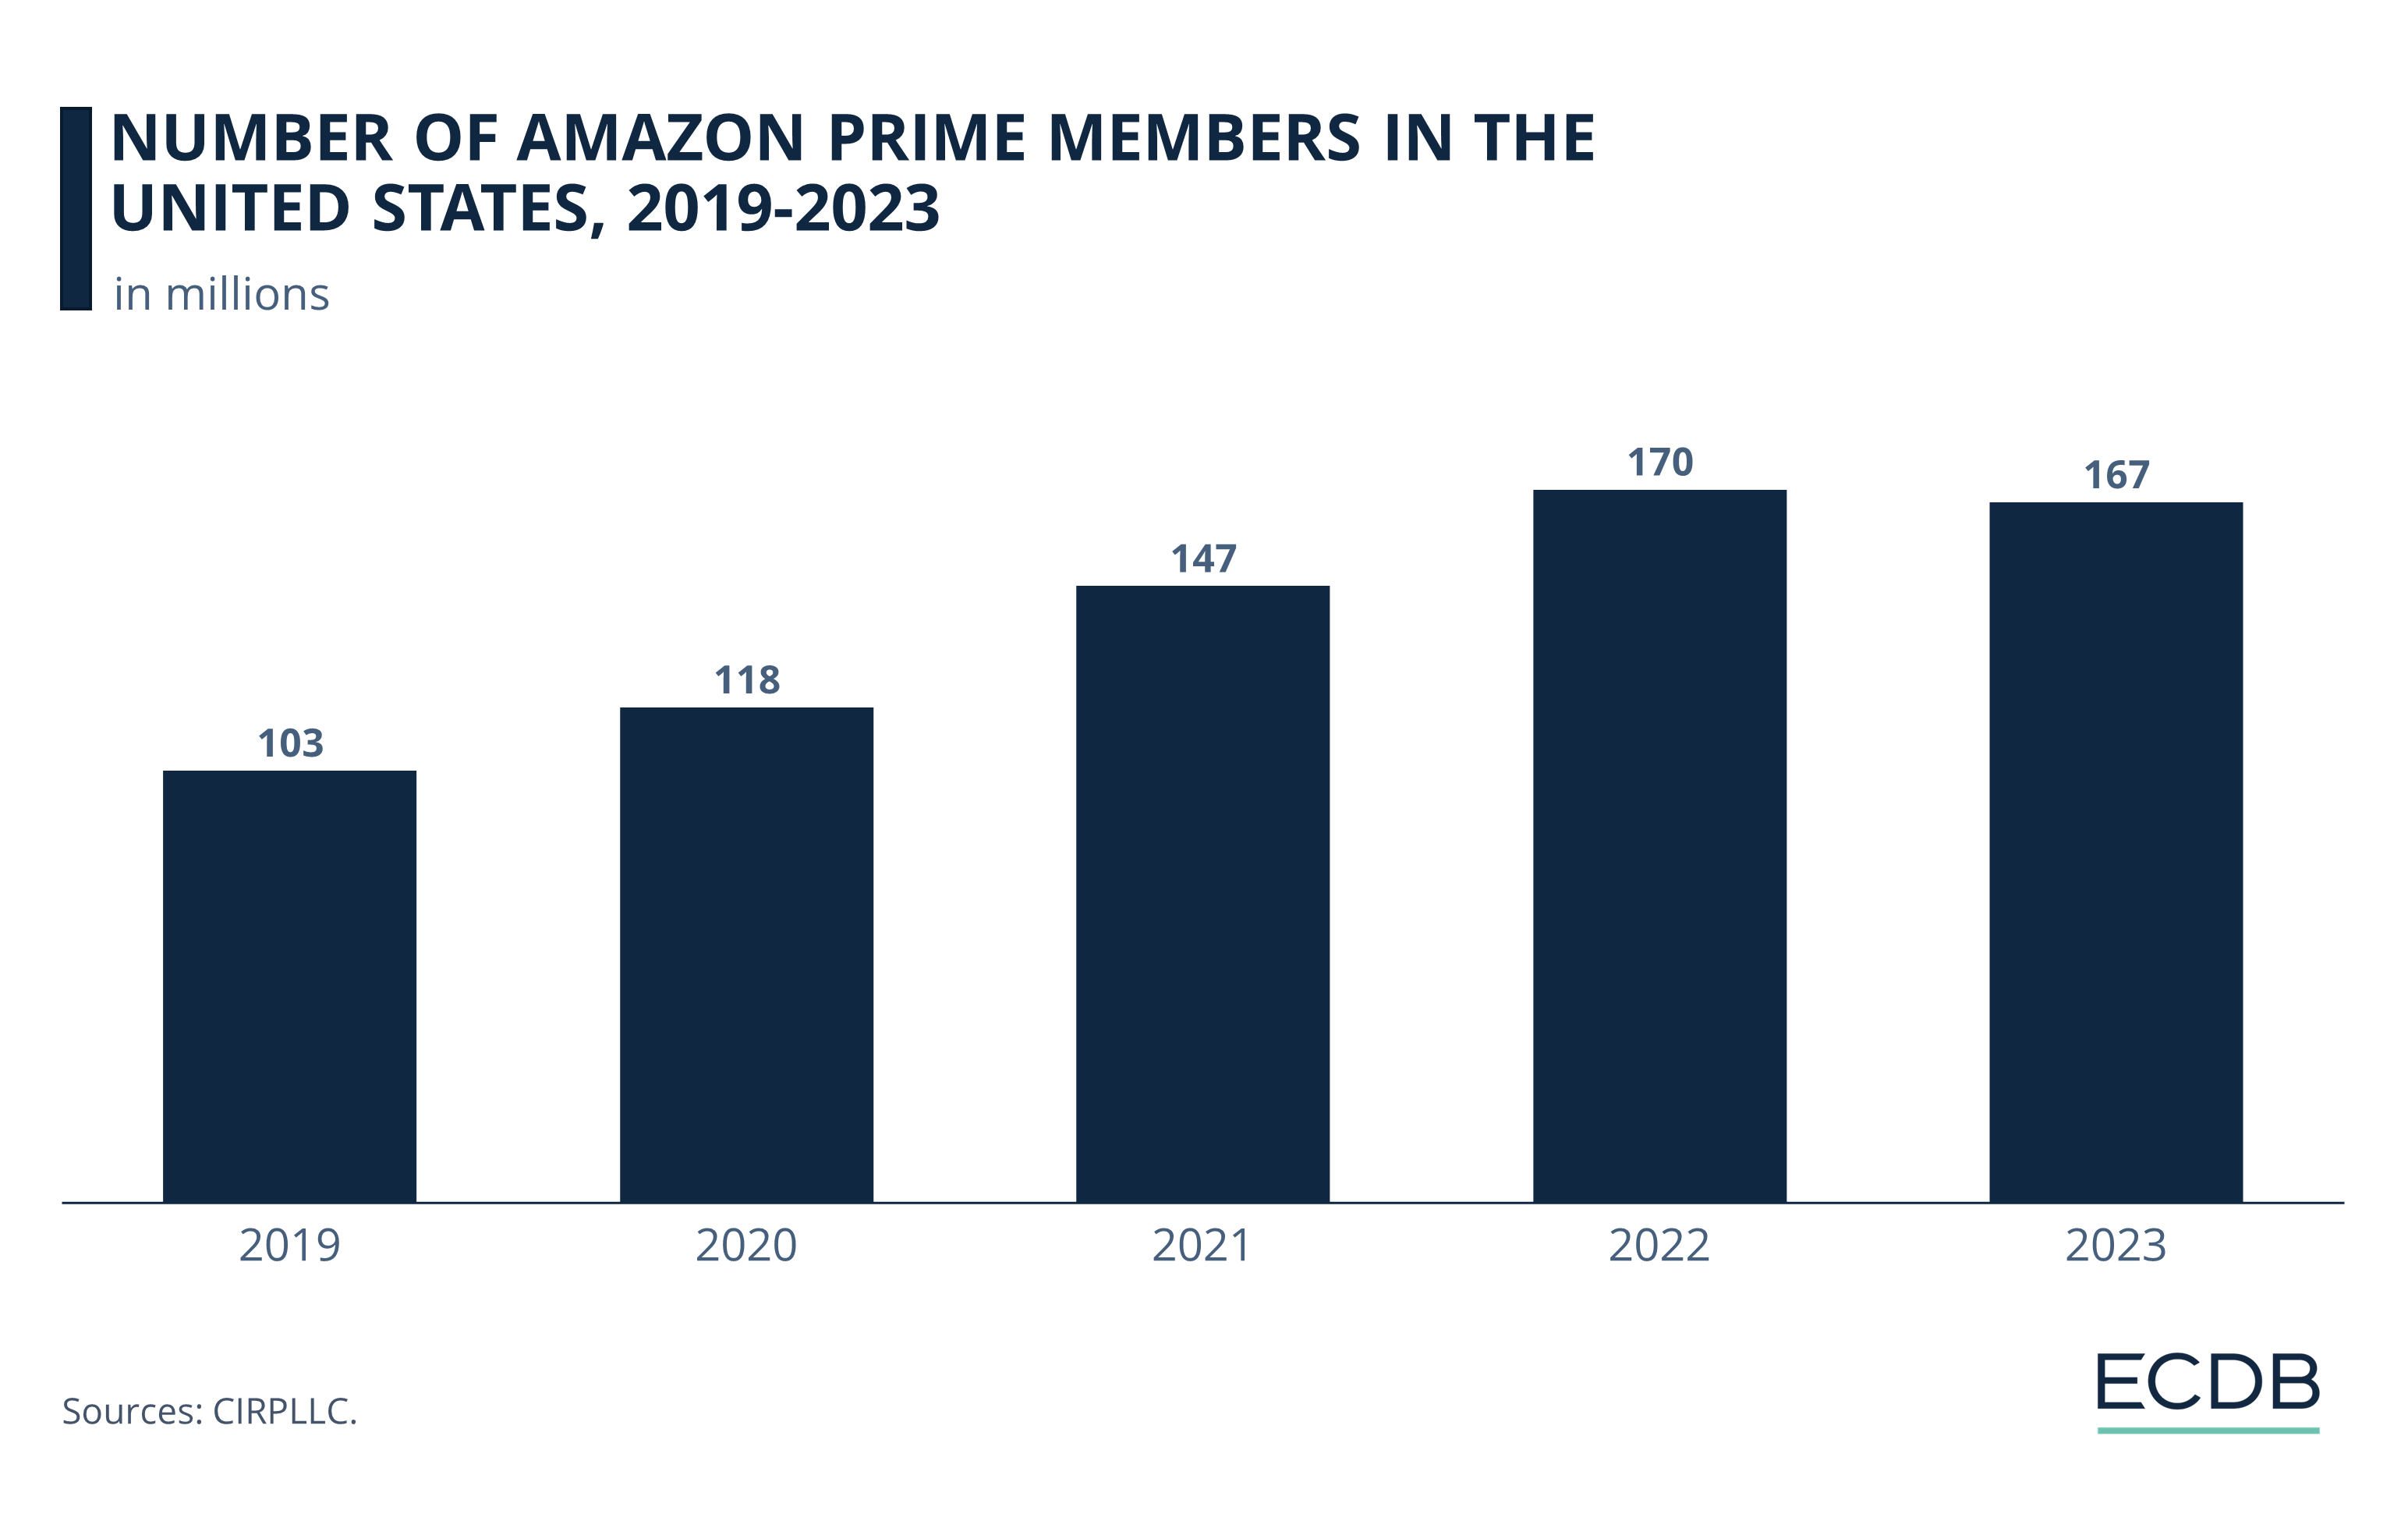 Number of Amazon Prime Members in the United States, 2019-2023